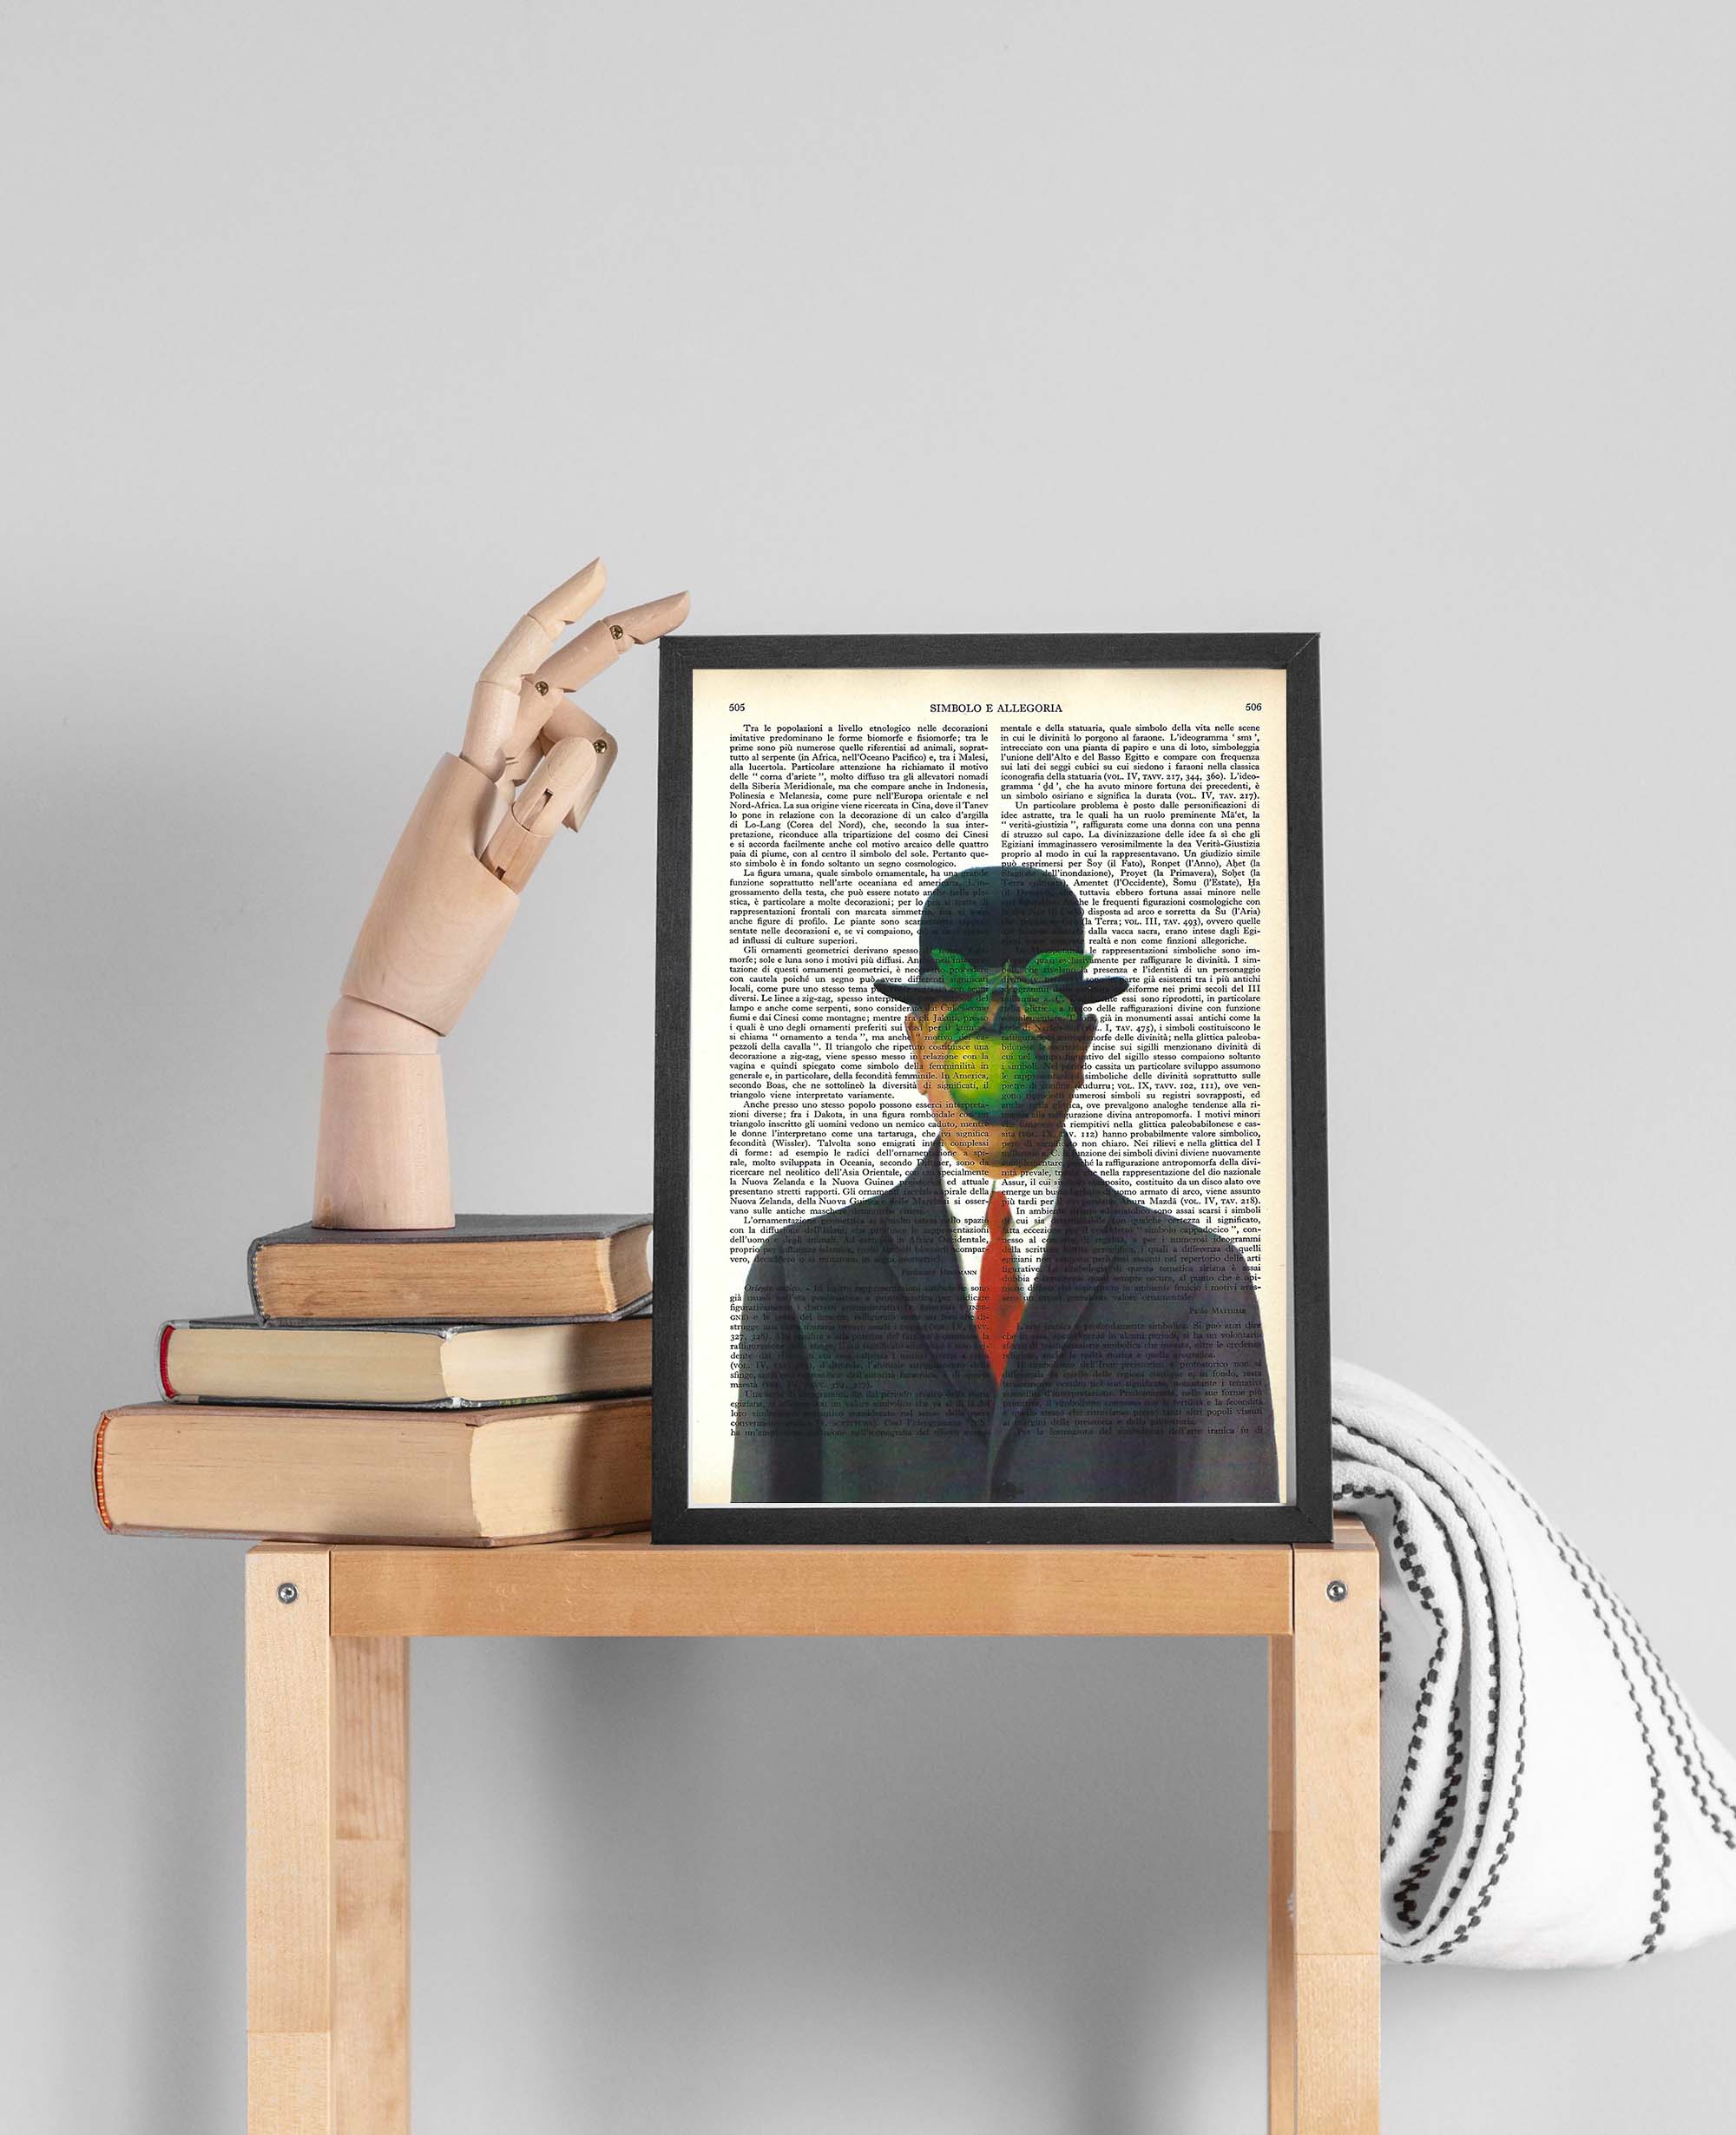 Mix-up: The Son of Man – René Magritte